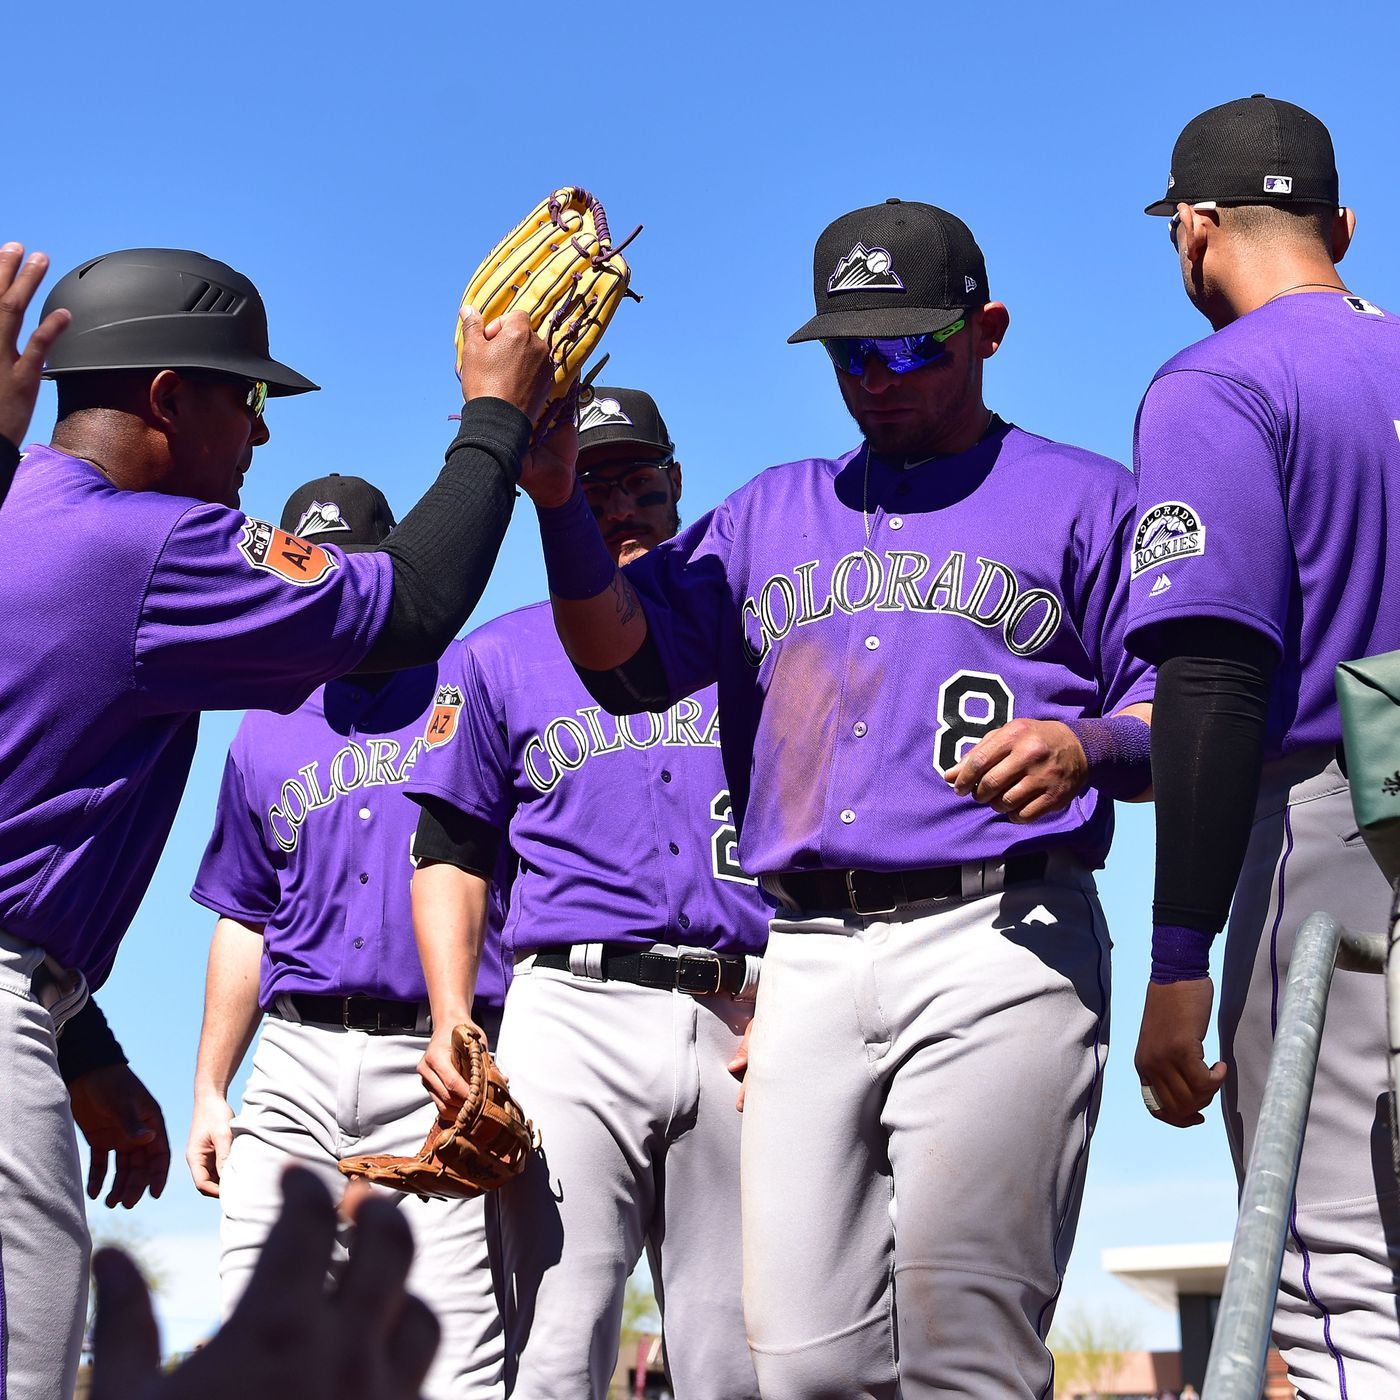 Are the Rockies due for an updated uniform design? Let's discuss